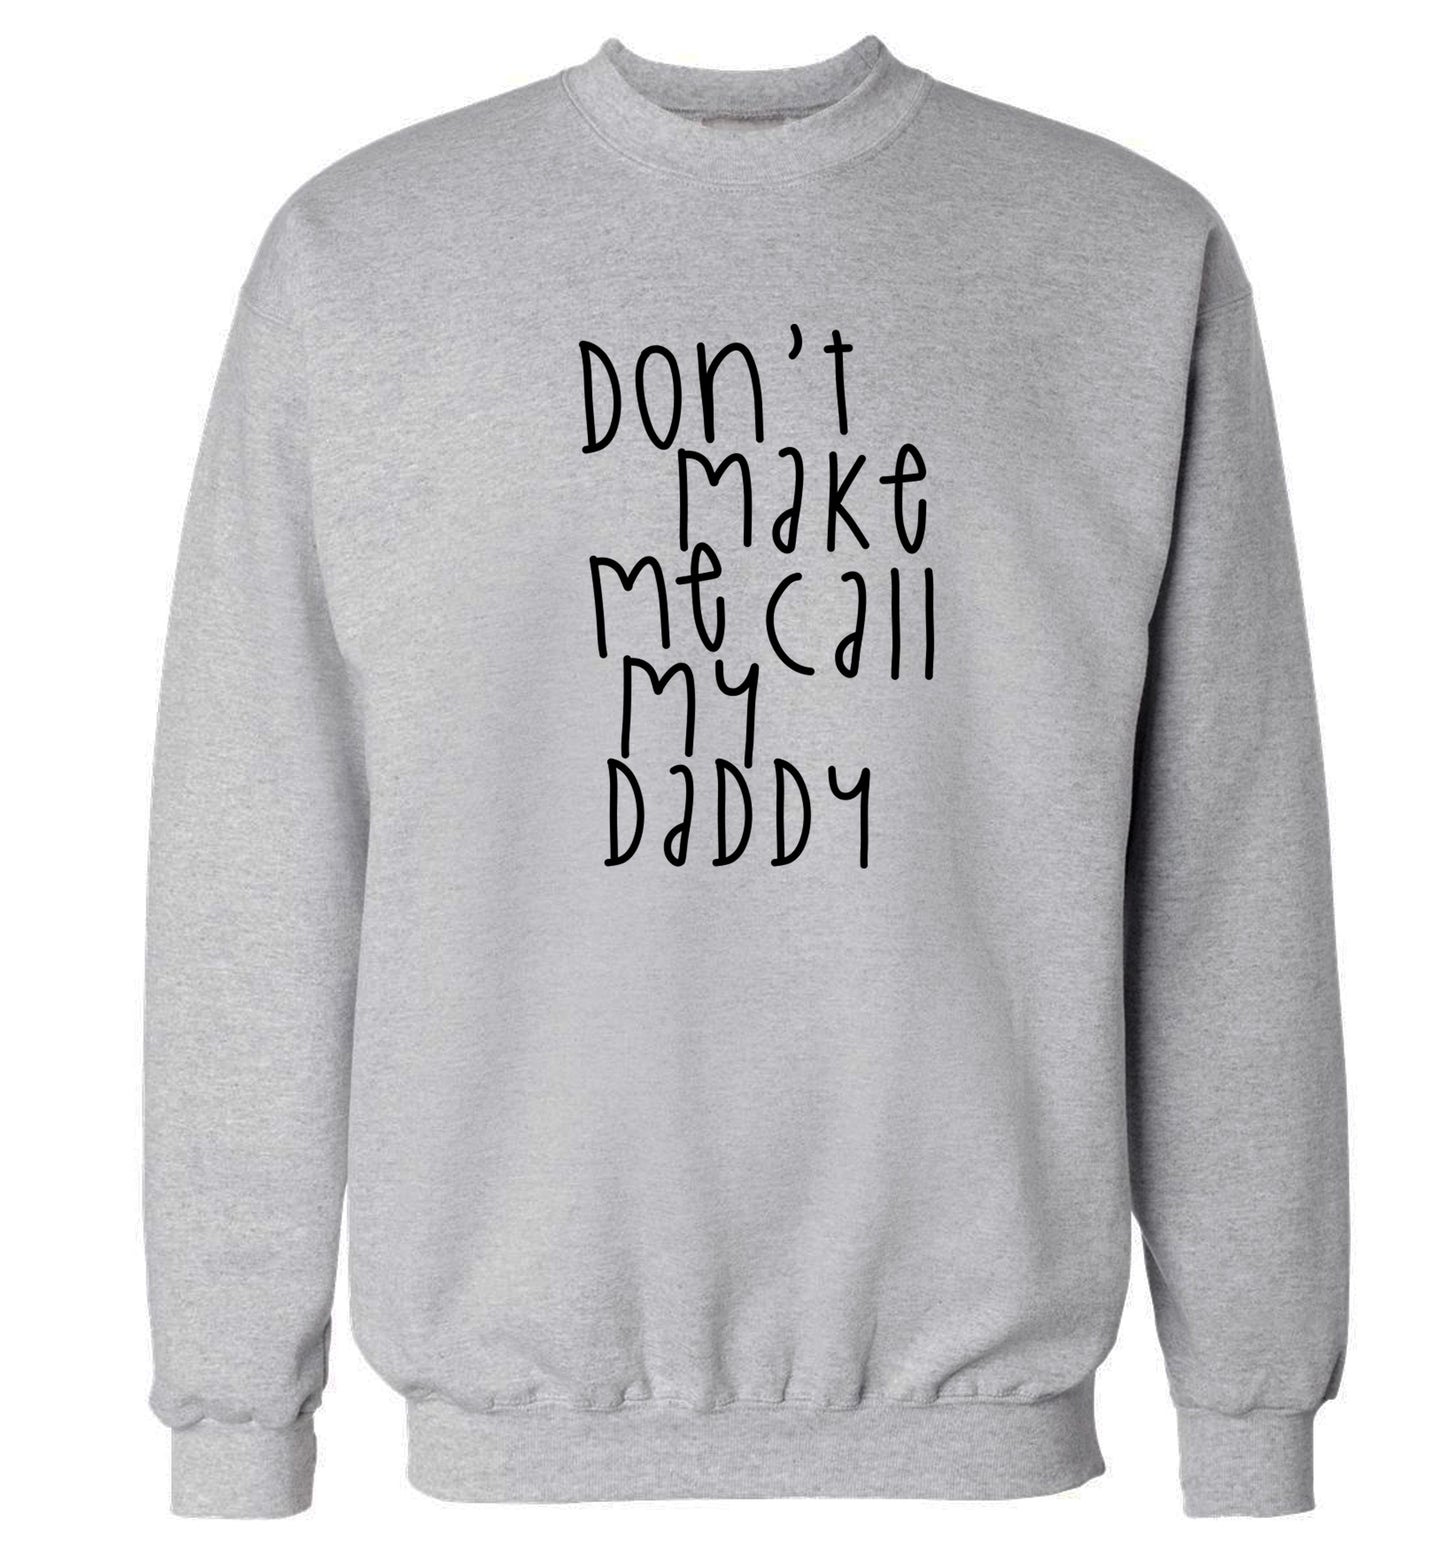 Don't make me call my daddy Adult's unisex grey Sweater 2XL